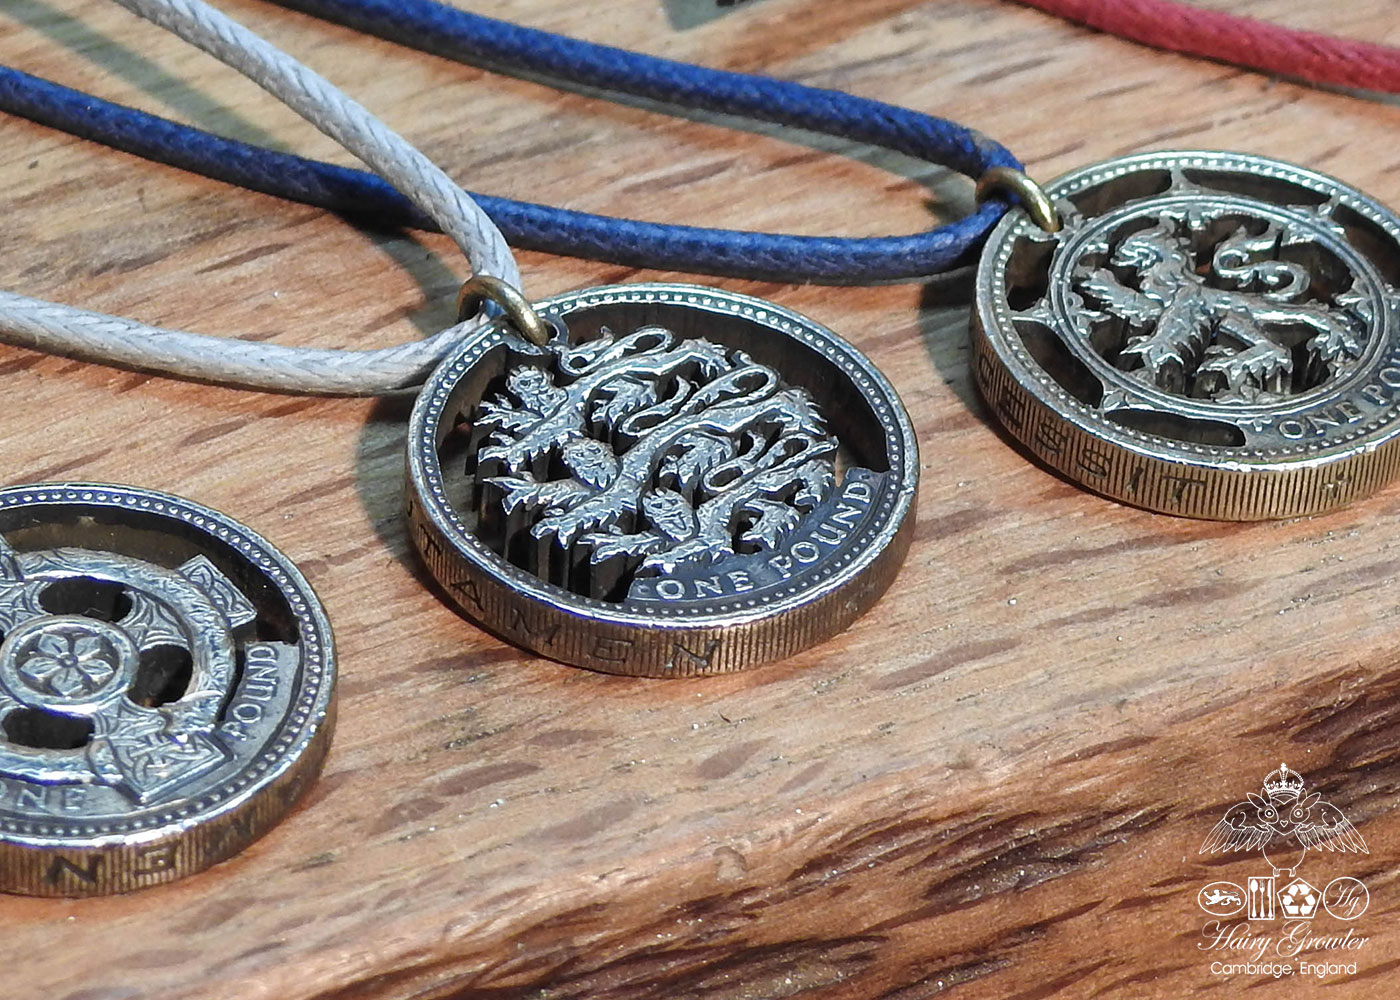 Hand Crafted and cut one pound coin pendants created from old, out of circulation pound coins, totally original and unique